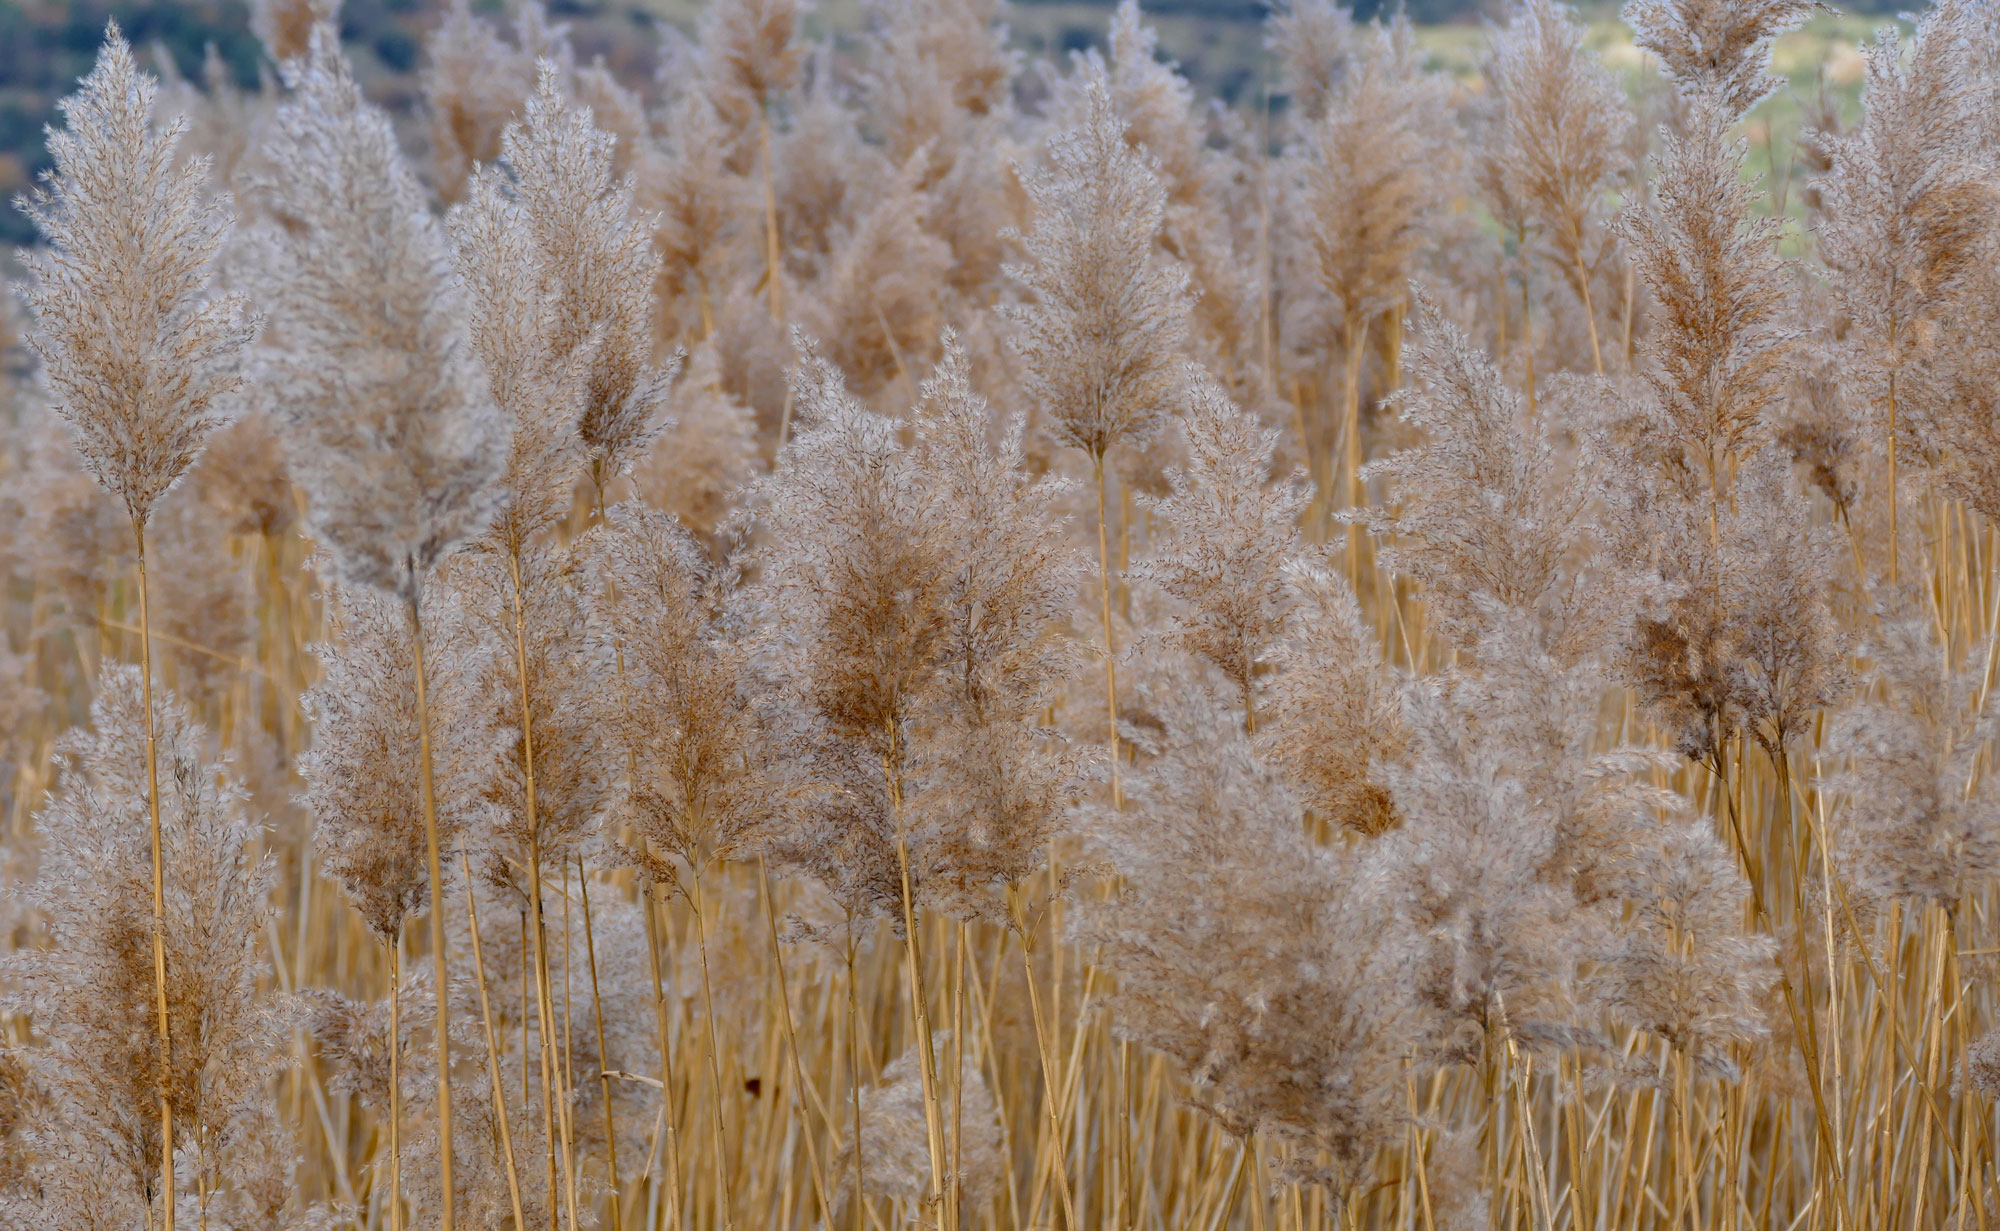 Photograph of common reed inflorescence. The photo shows feathery beige inflorescence at the ends of yellow stalks.